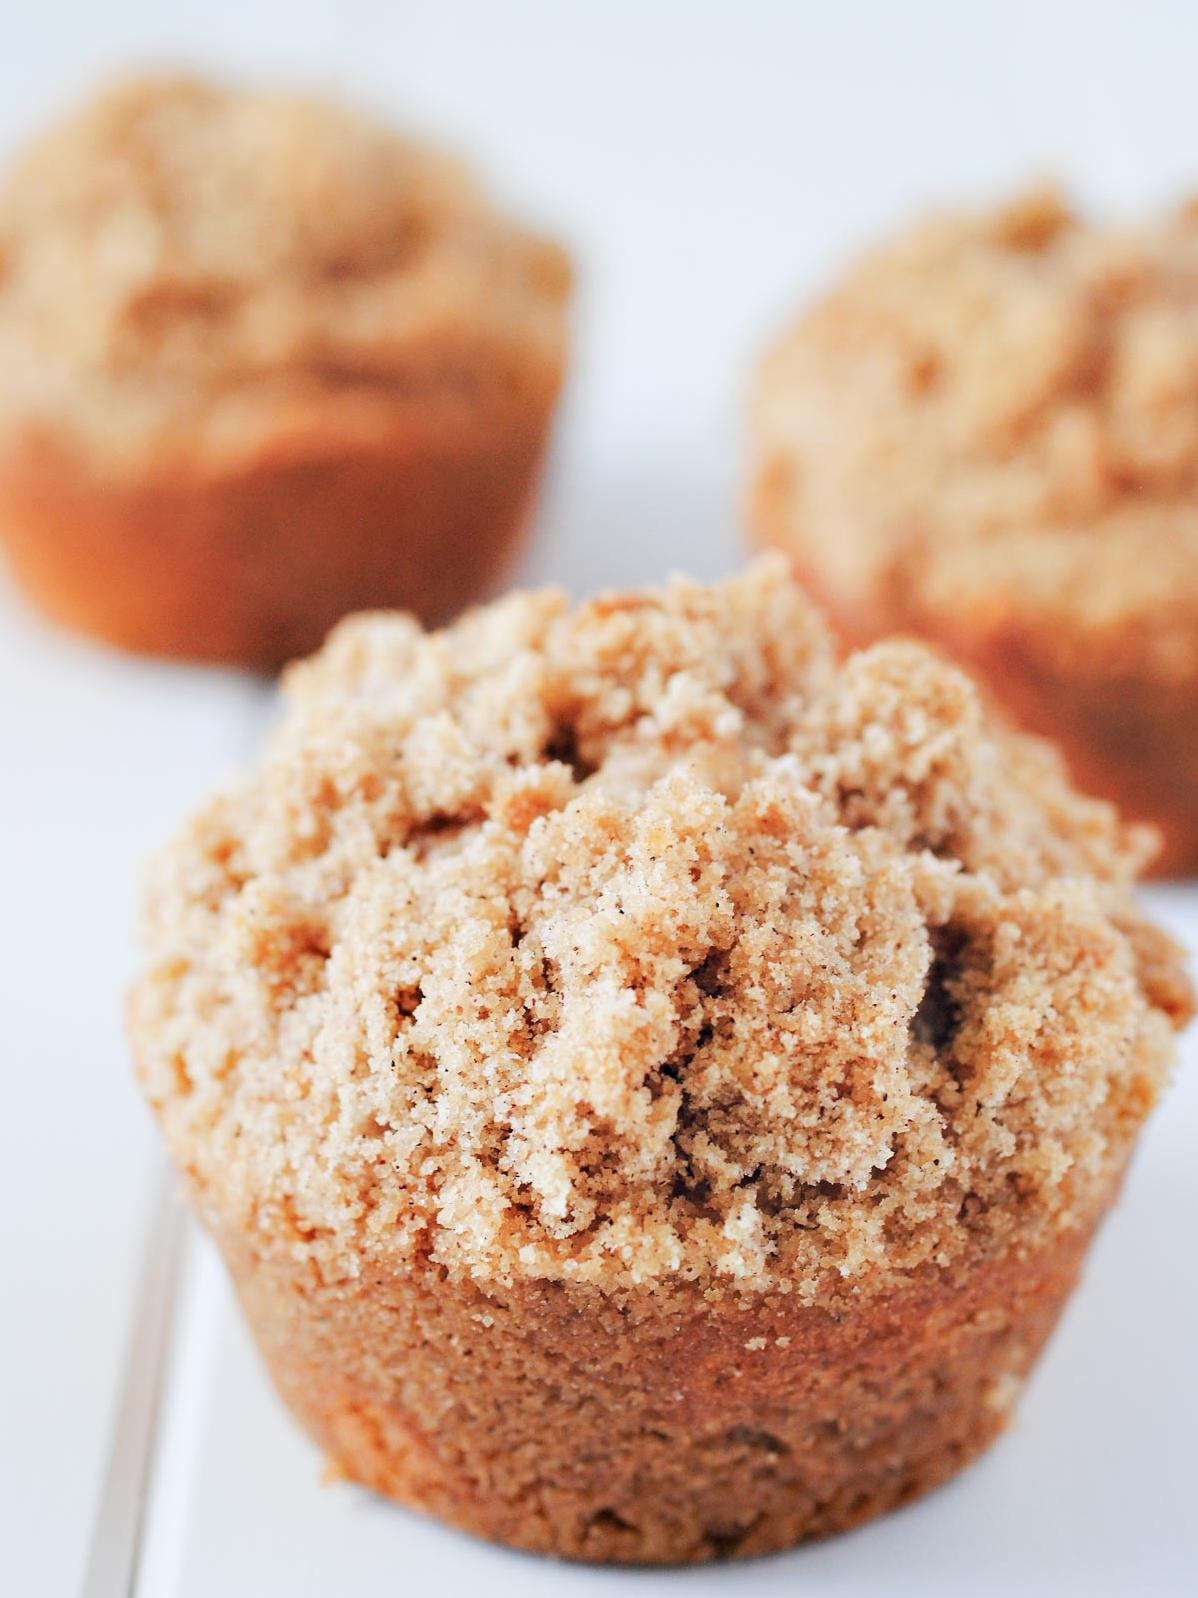  These muffins will make your taste buds dance with joy!